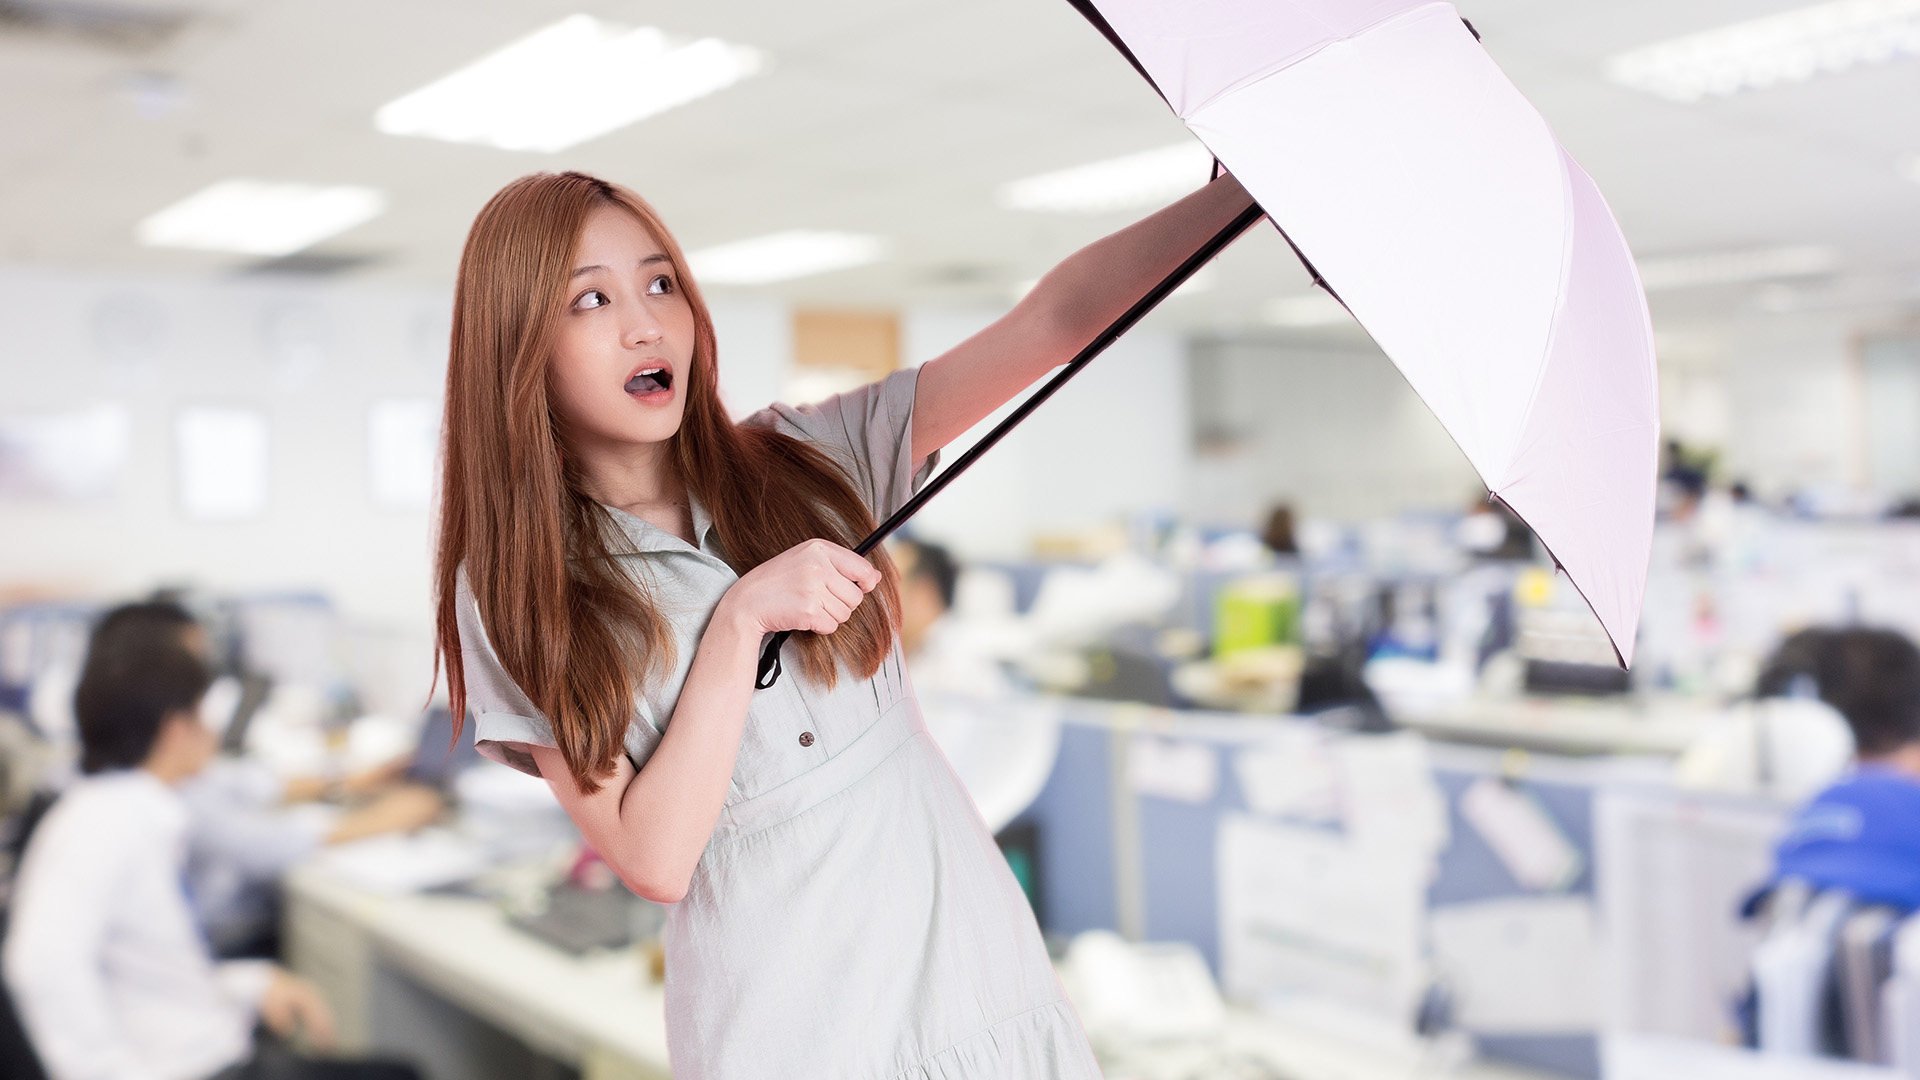 Corporate management complained that the woman used umbrellas to hide her desk from supervisors. 
Photo: SCMP composite/Shutterstock